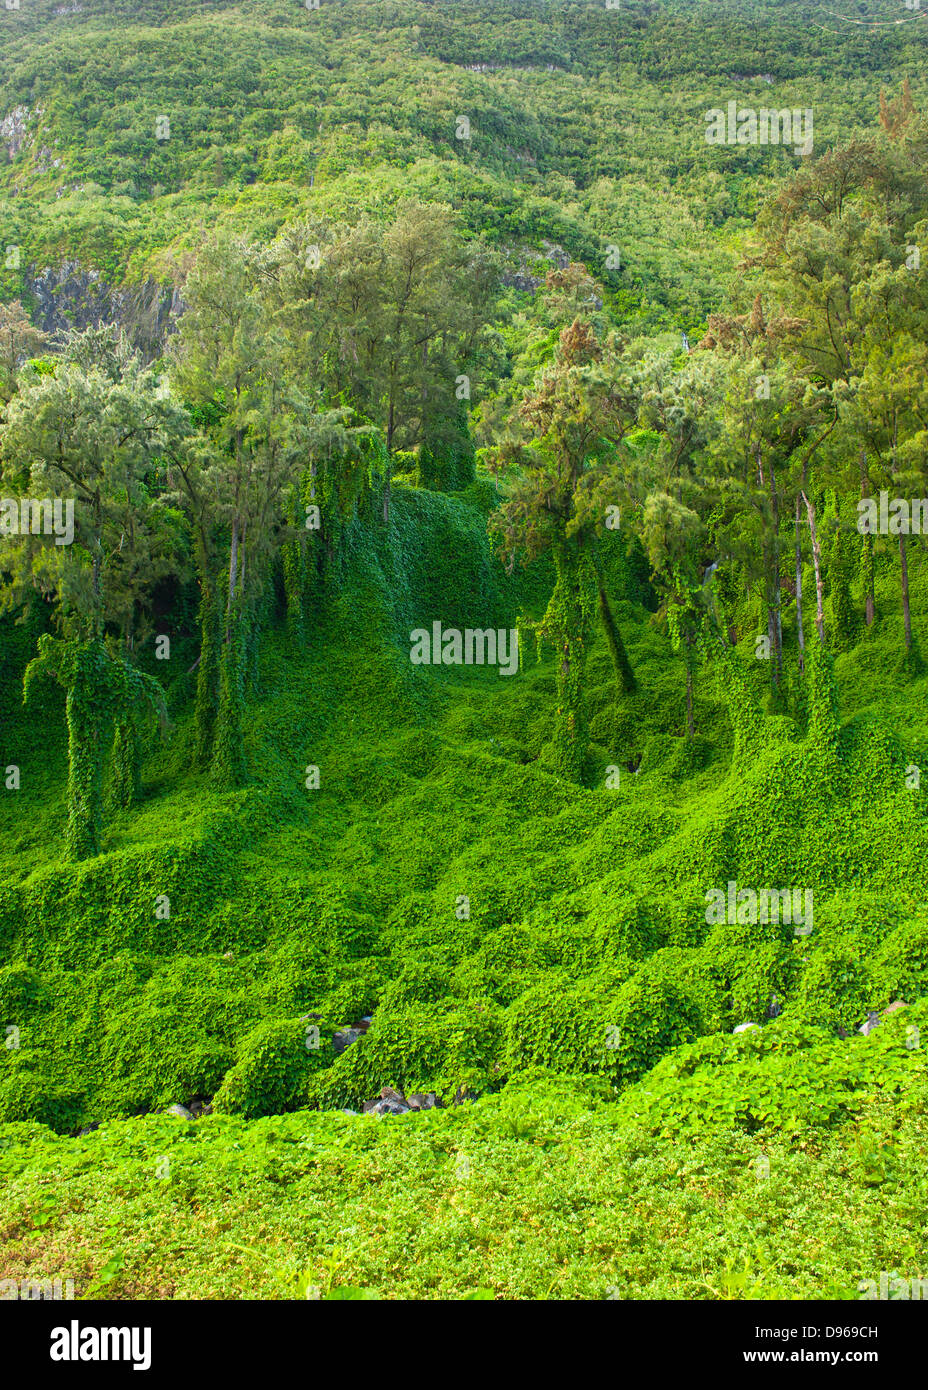 Tropical vegetation growing in the Cirque de Salazie caldera on the French island of Reunion in the Indian Ocean. Stock Photo